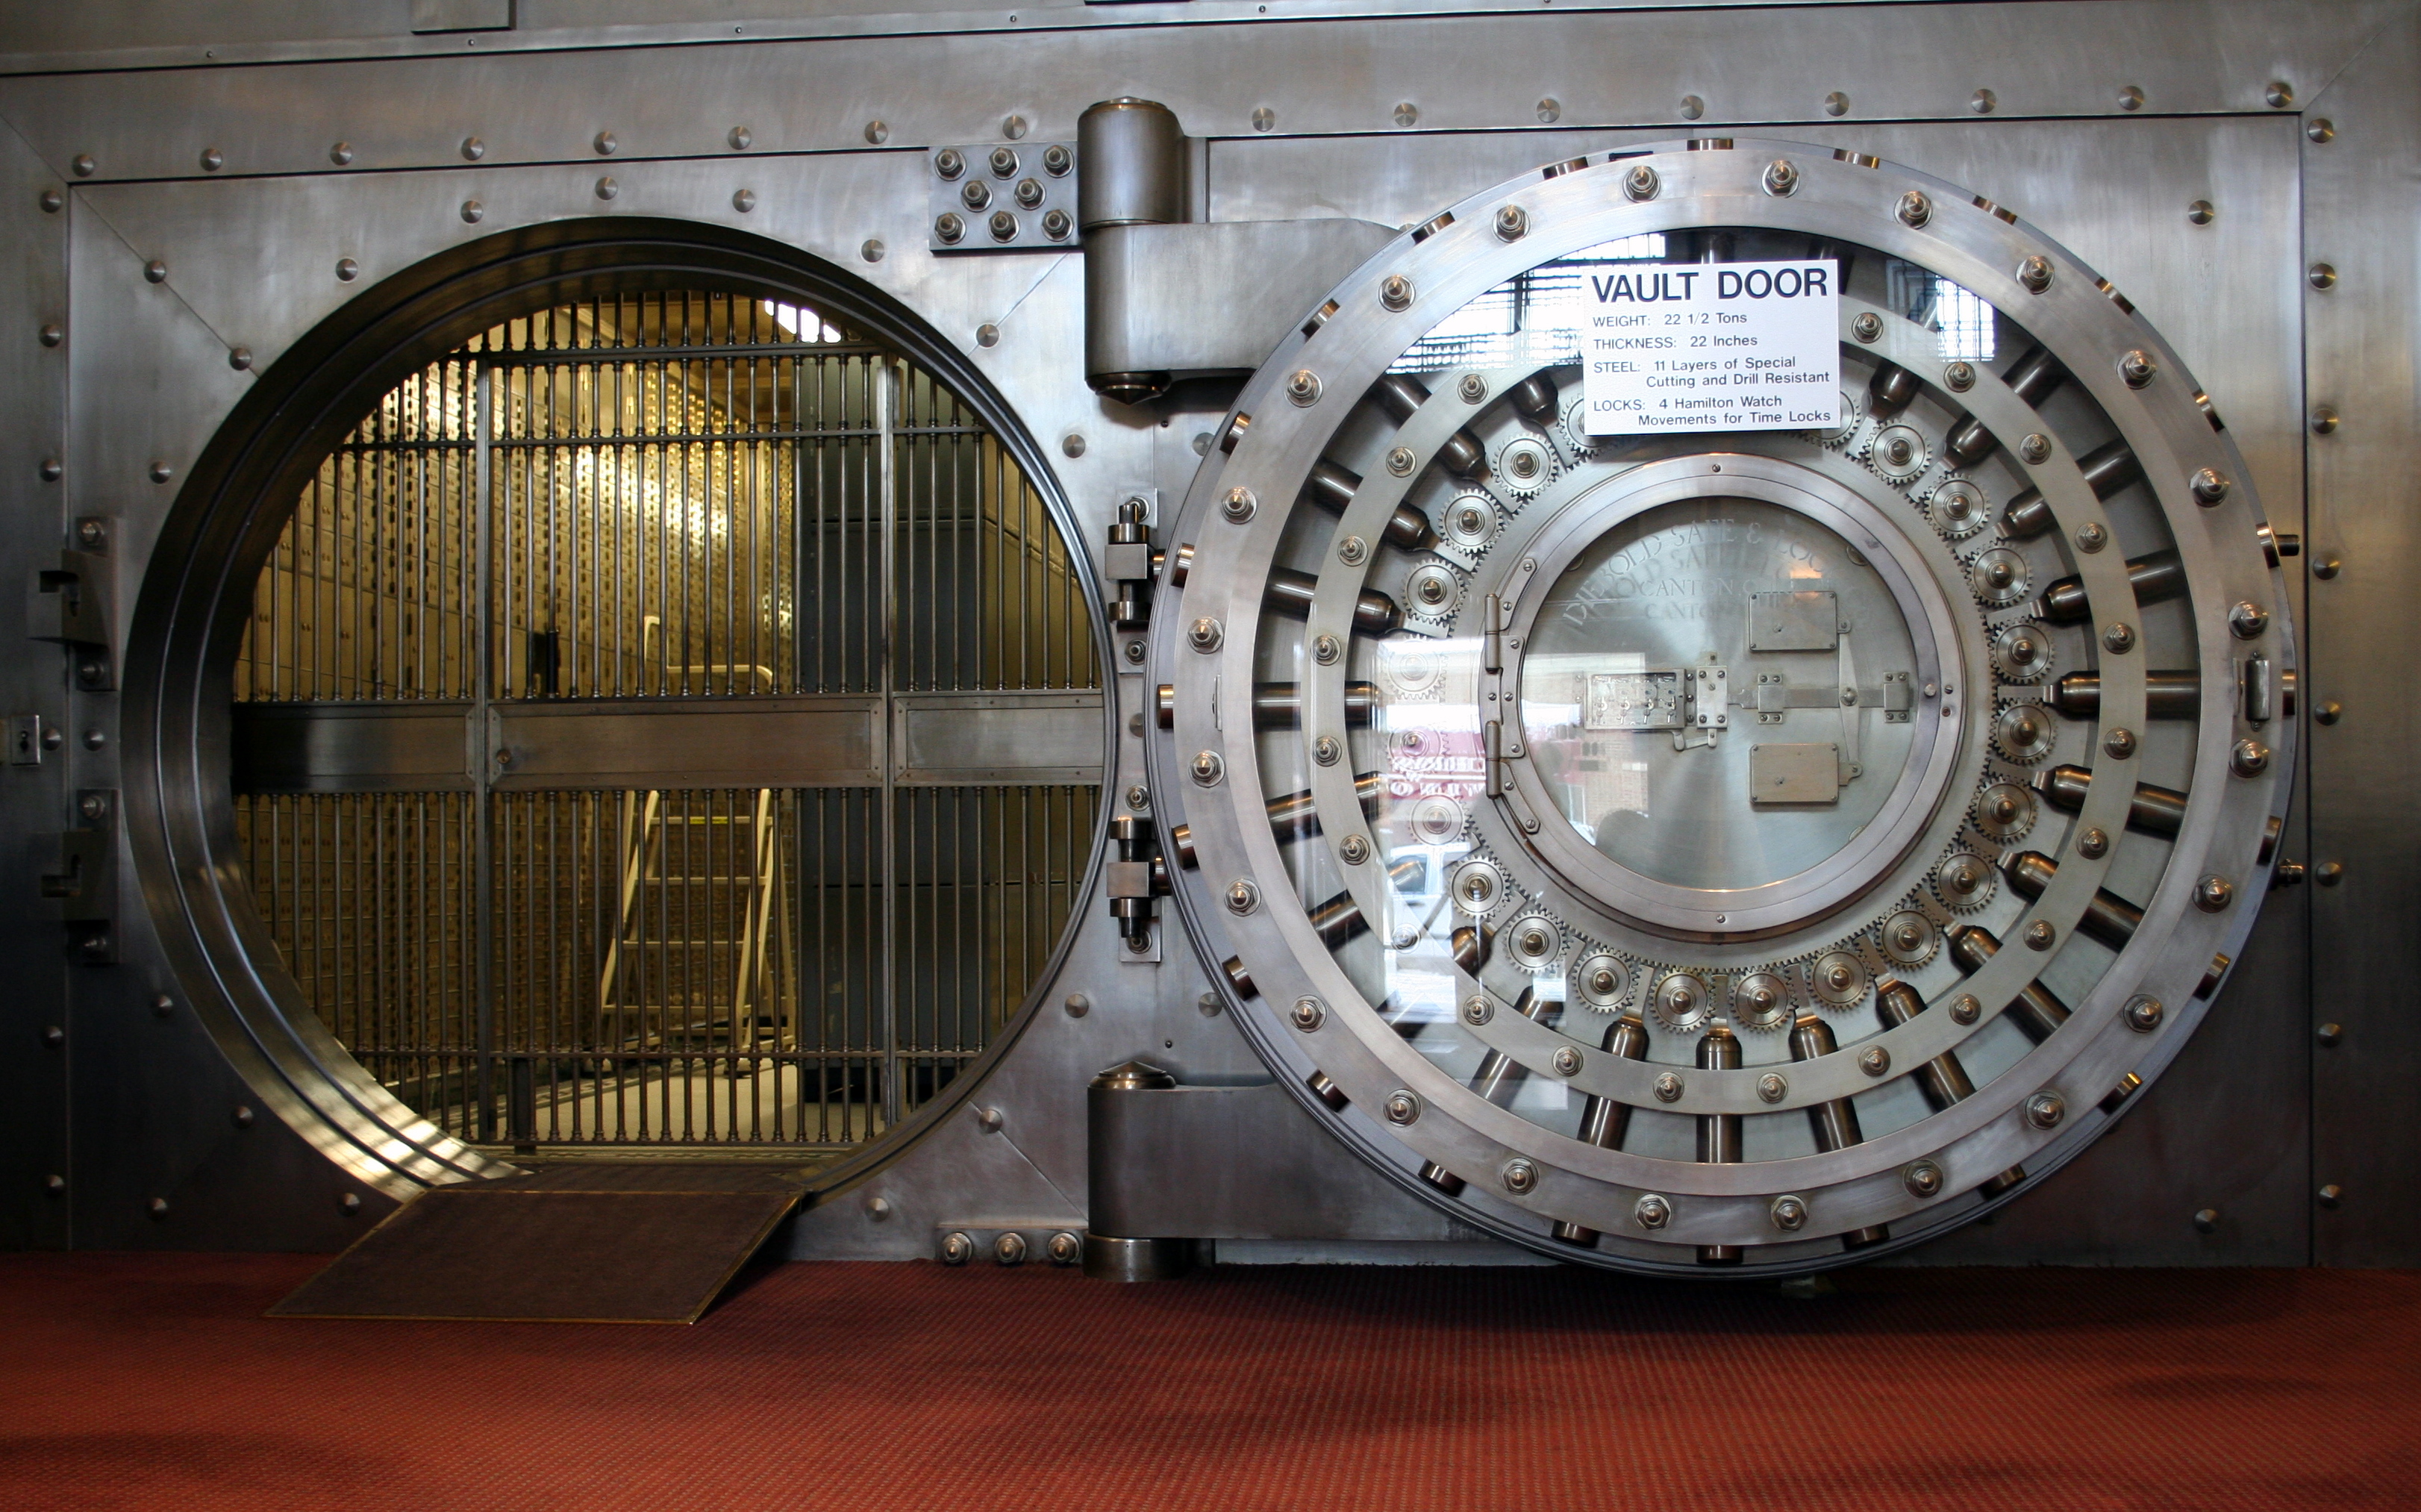 Depository vault with metal bars